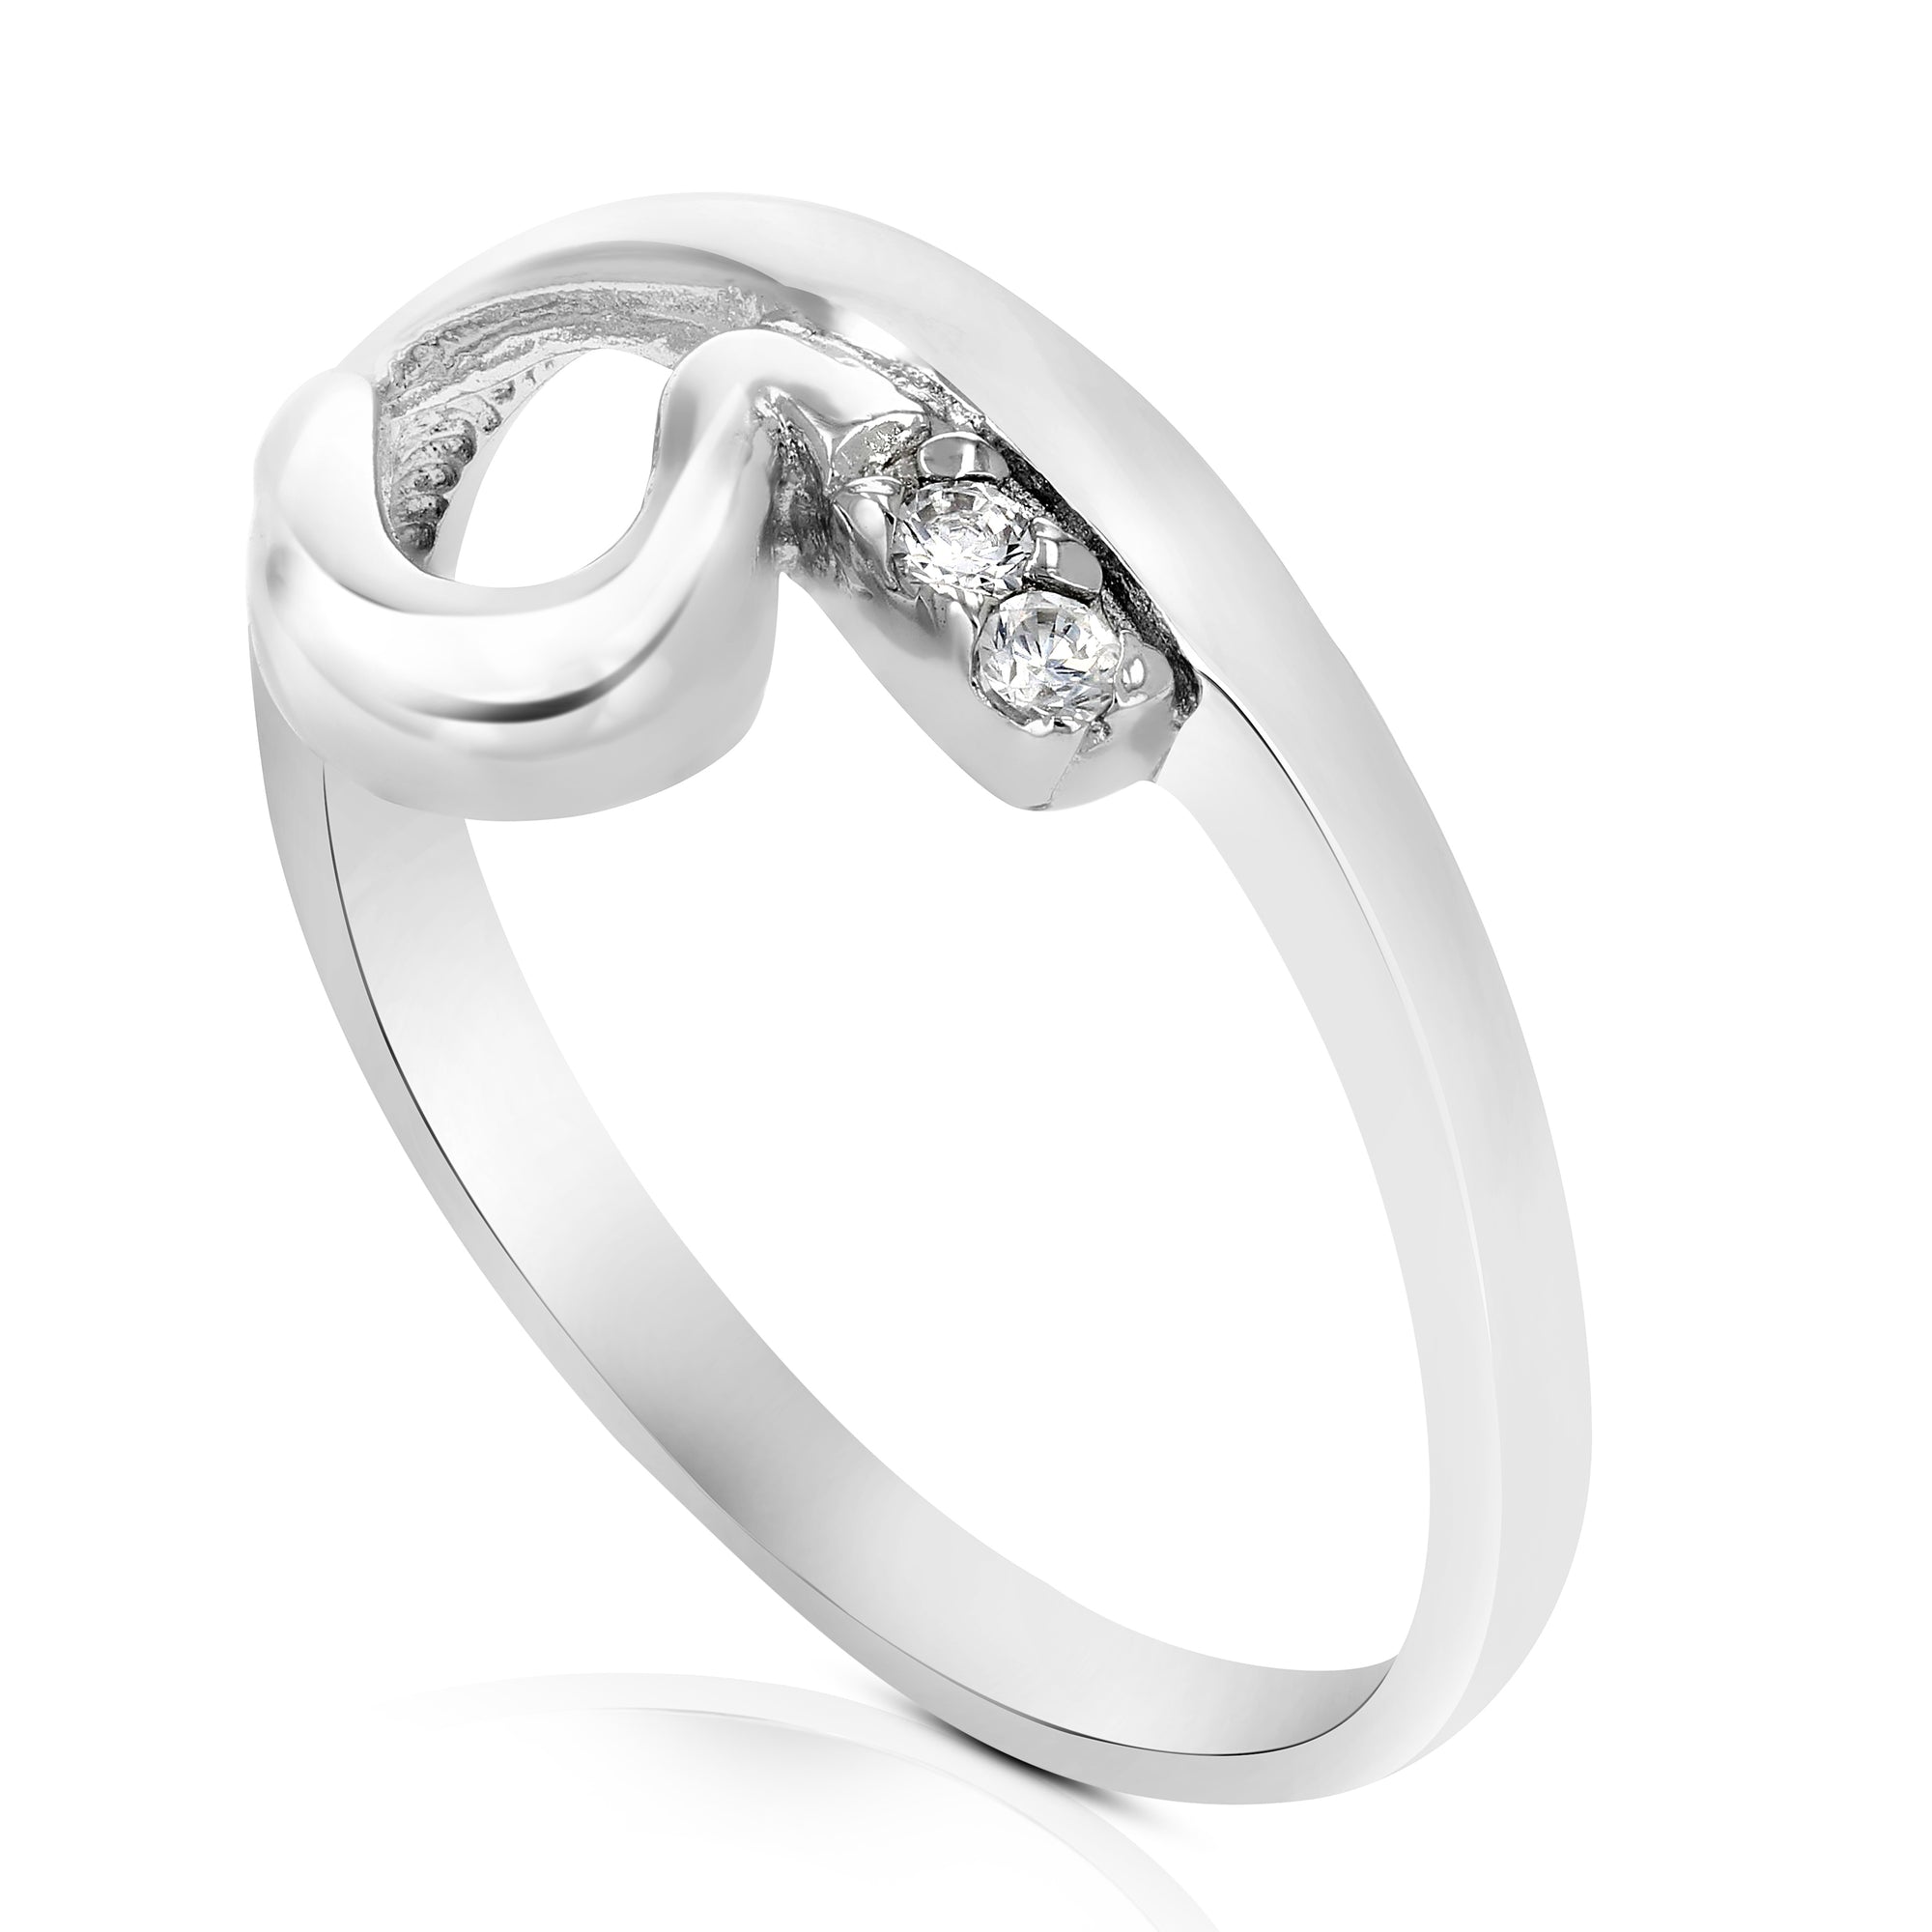 Cubic Zirconia Ring .925 Sterling Silver with Rhodium Plating Round Shape